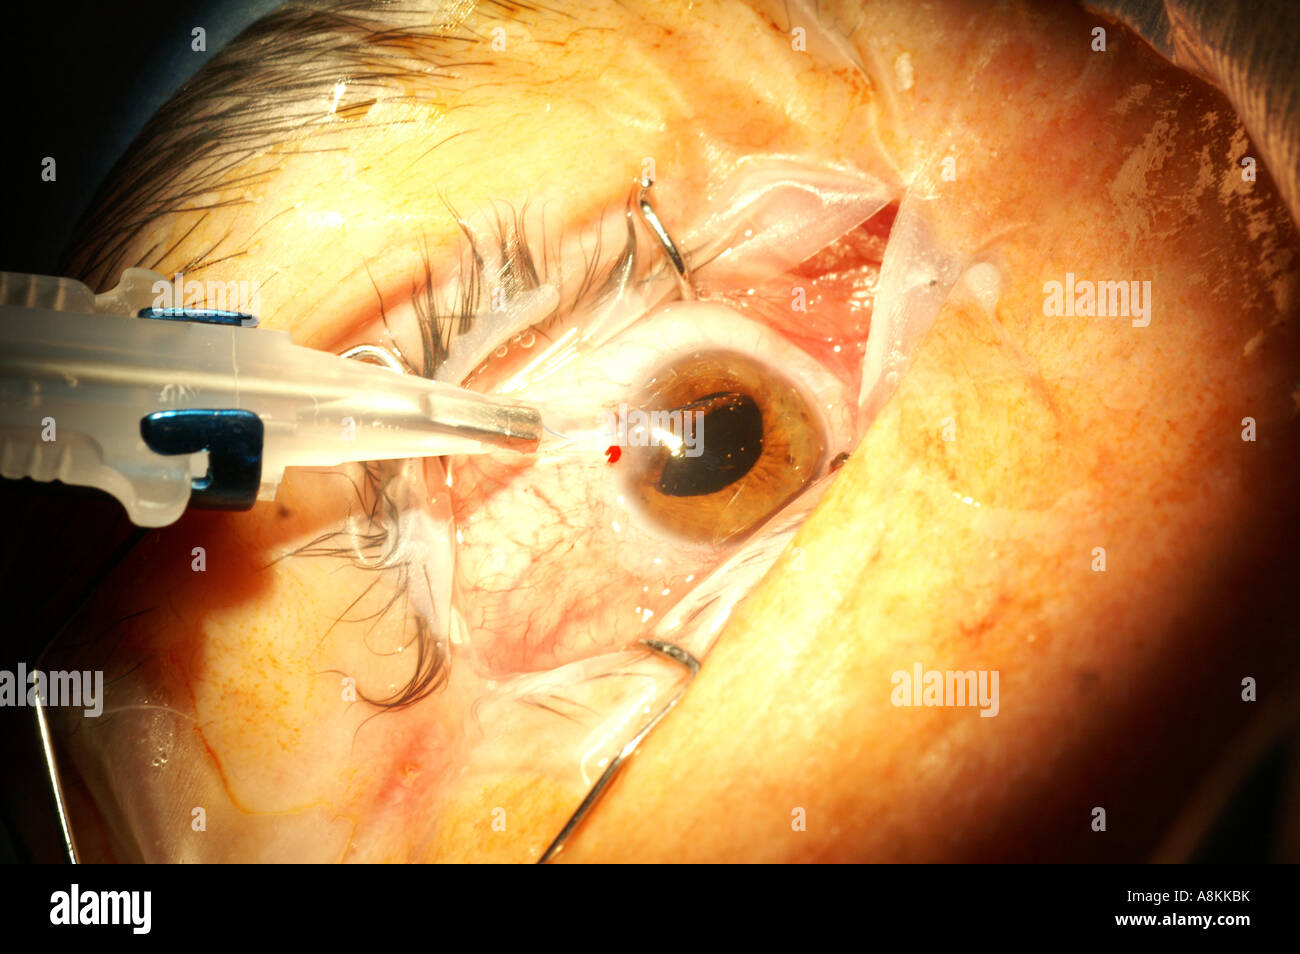 Cataract surgery with the phacoemulsification method: after taking out the cataract a foldable intraocular lens is beeing injec Stock Photo